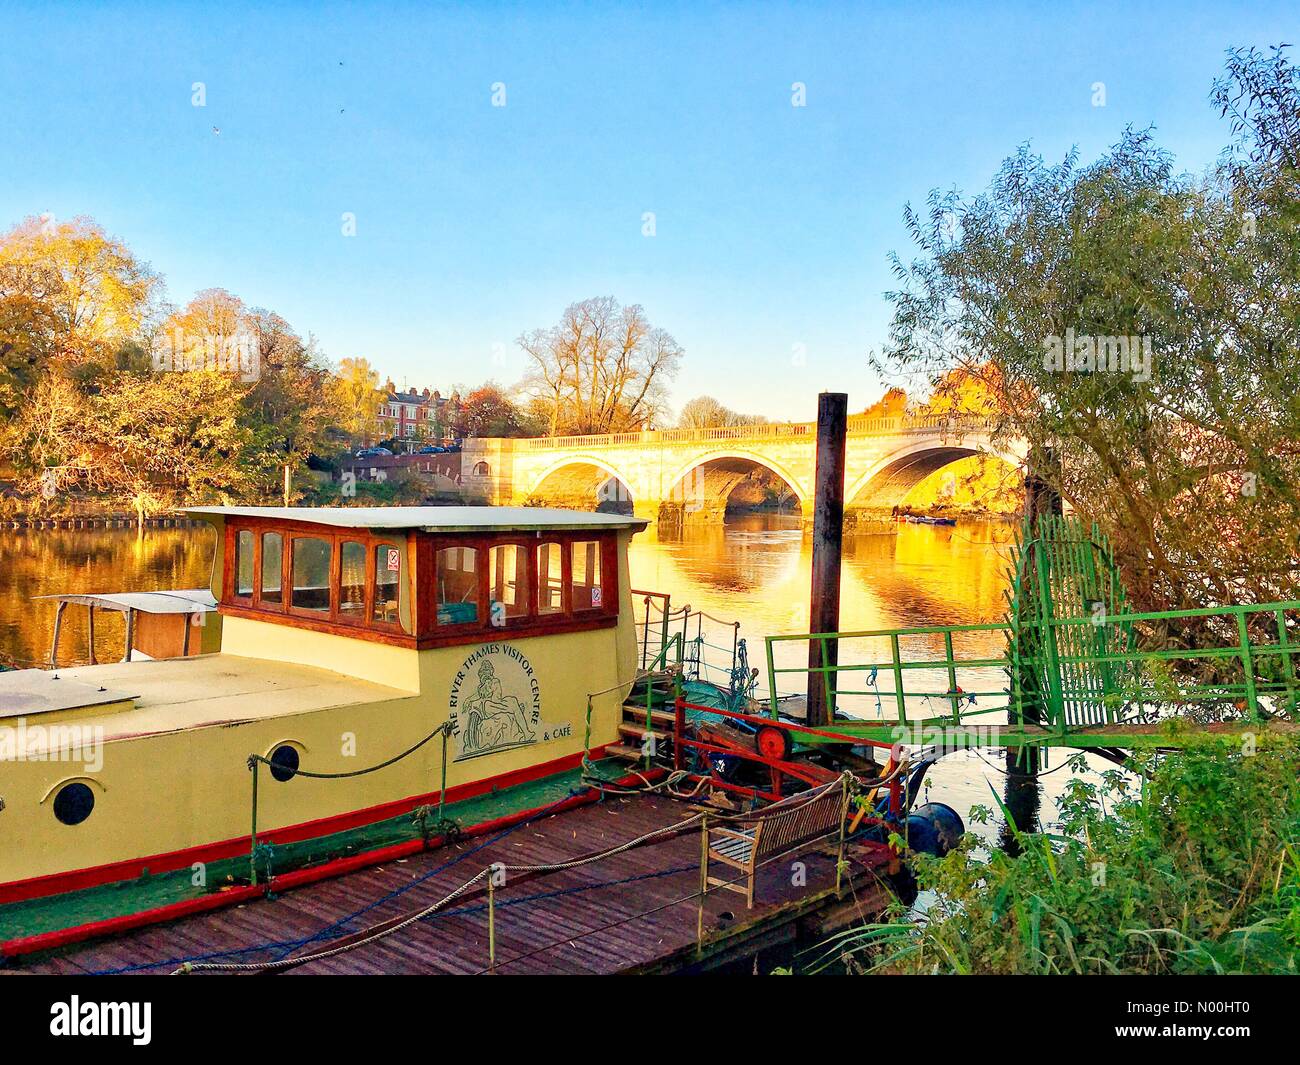 UK Weather 13 November 2017 A frosty morning of 1 degree C (33 F) at Richmond Upon Thames. Credit: Lisa Werner/Stockimo News/Alamy Stock Photo